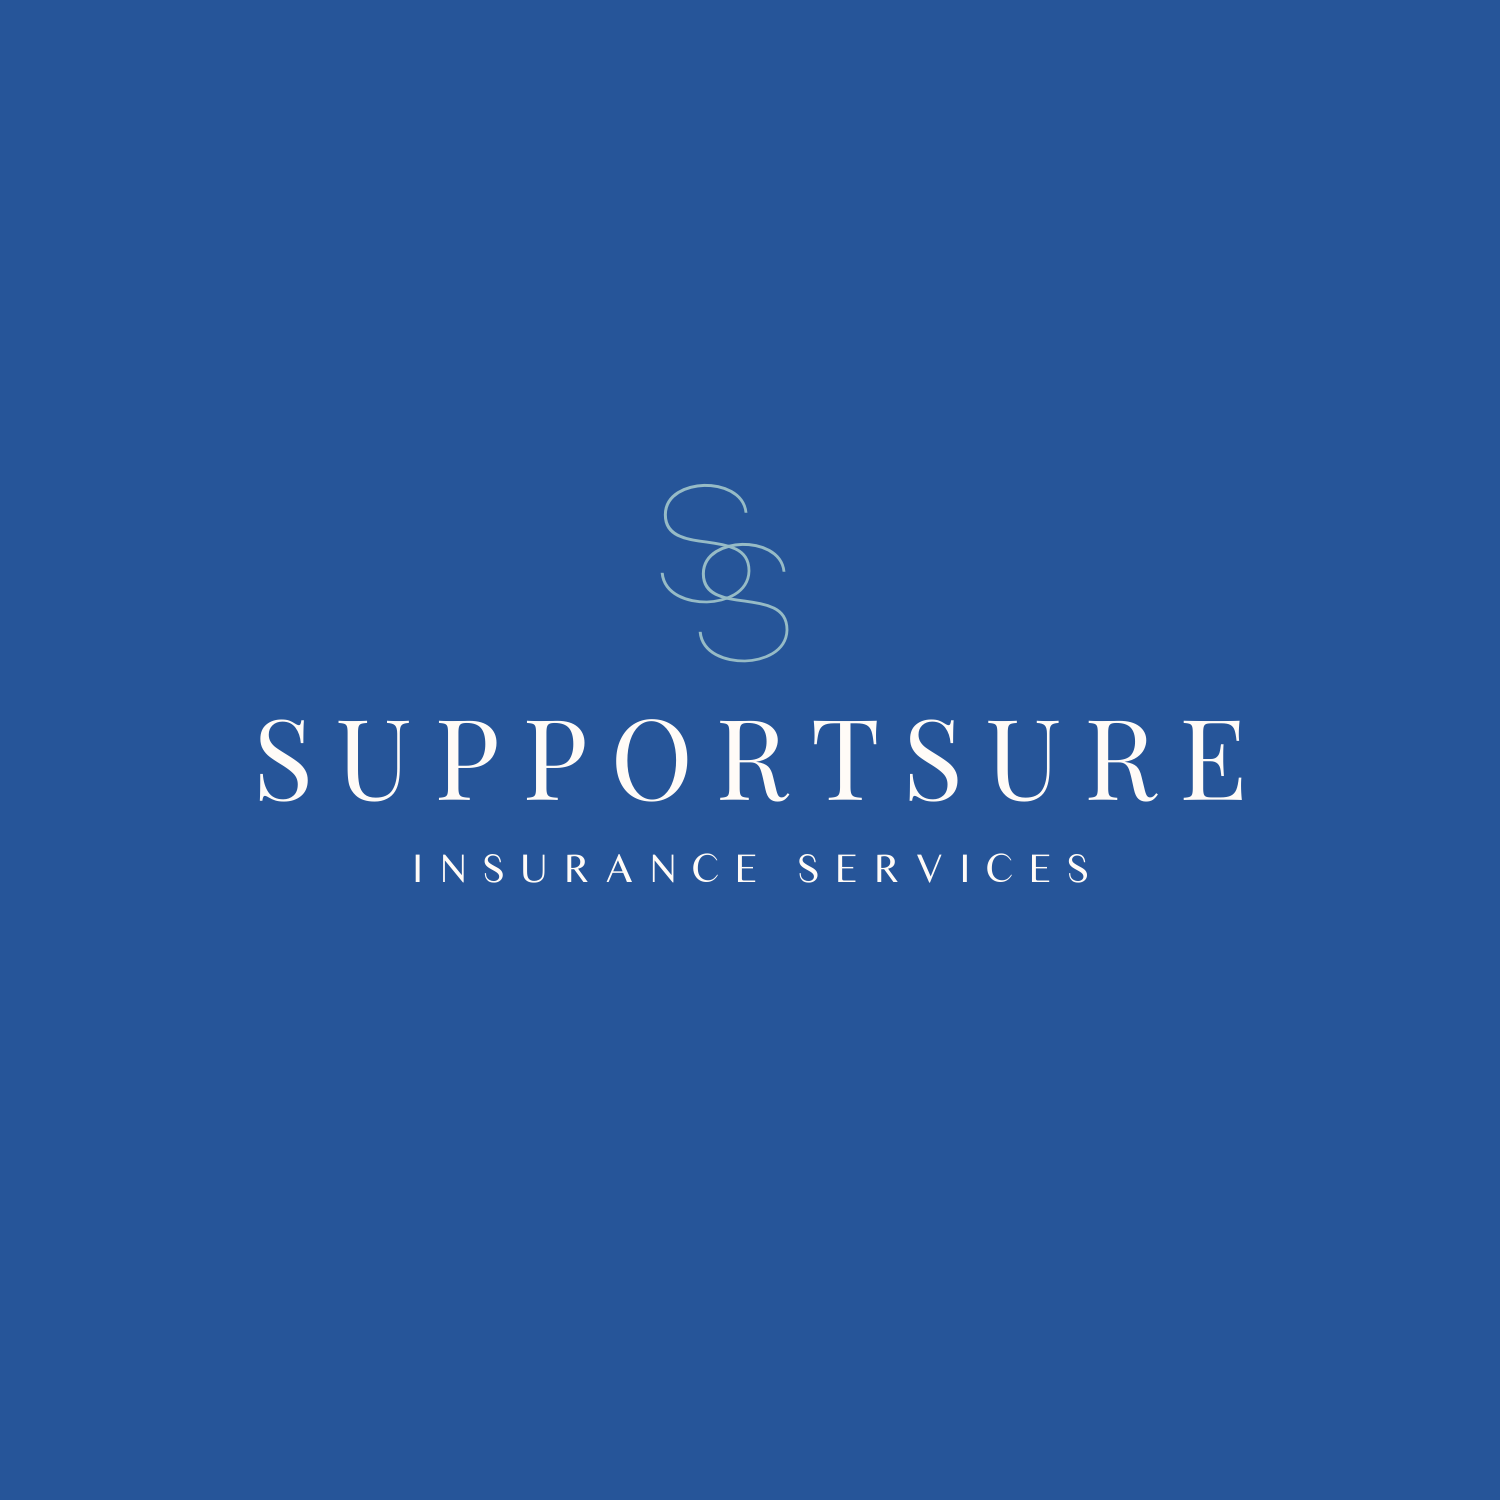 Business Insurance Specialist - Supportsure Insurance Services - Gold Coast Insurance Broker